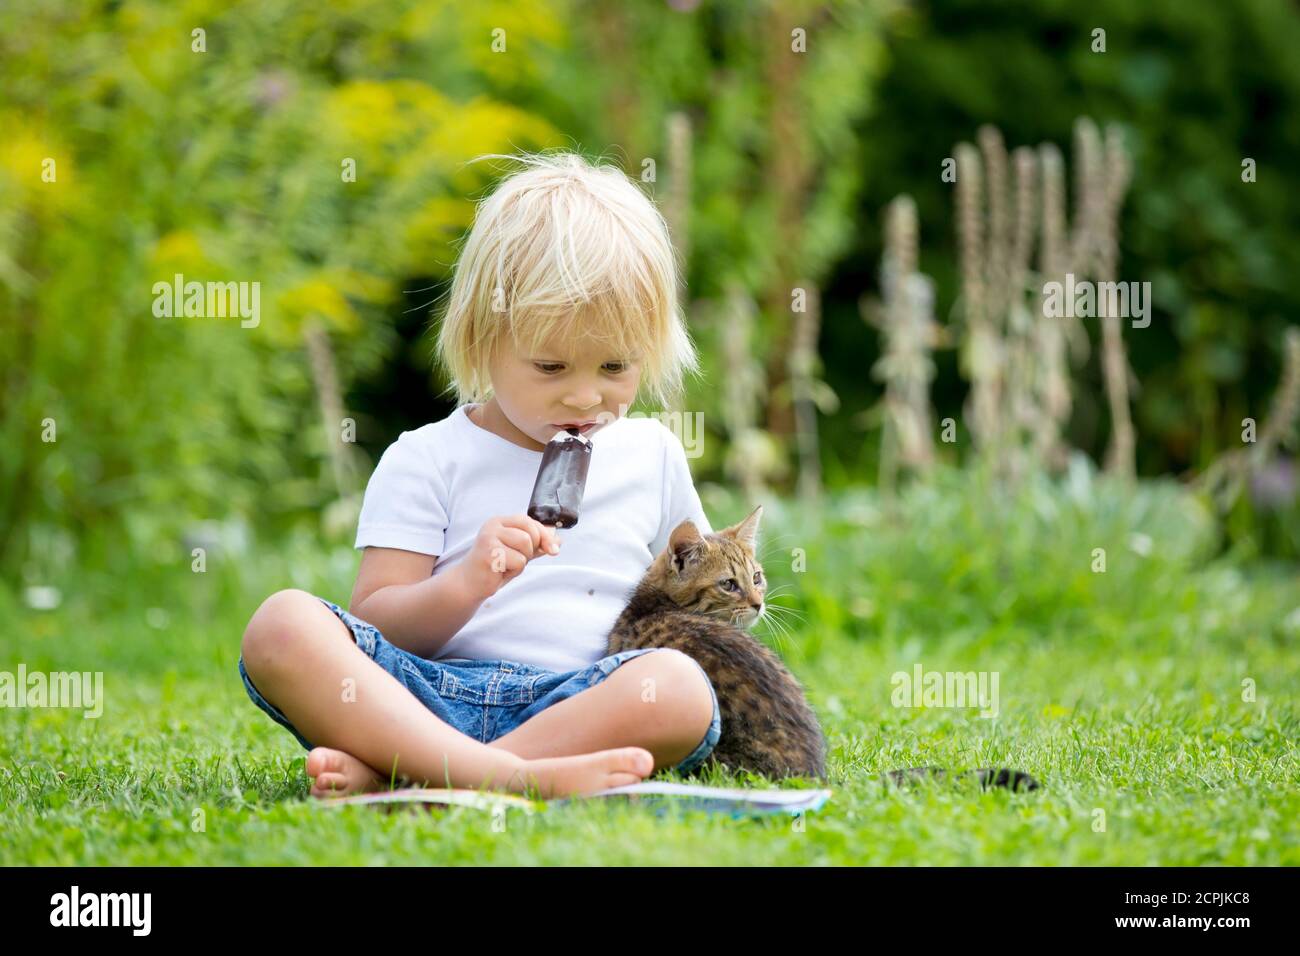 Cute blond toddler child, sweet boy, playing in garden with little kitten, reading book Stock Photo